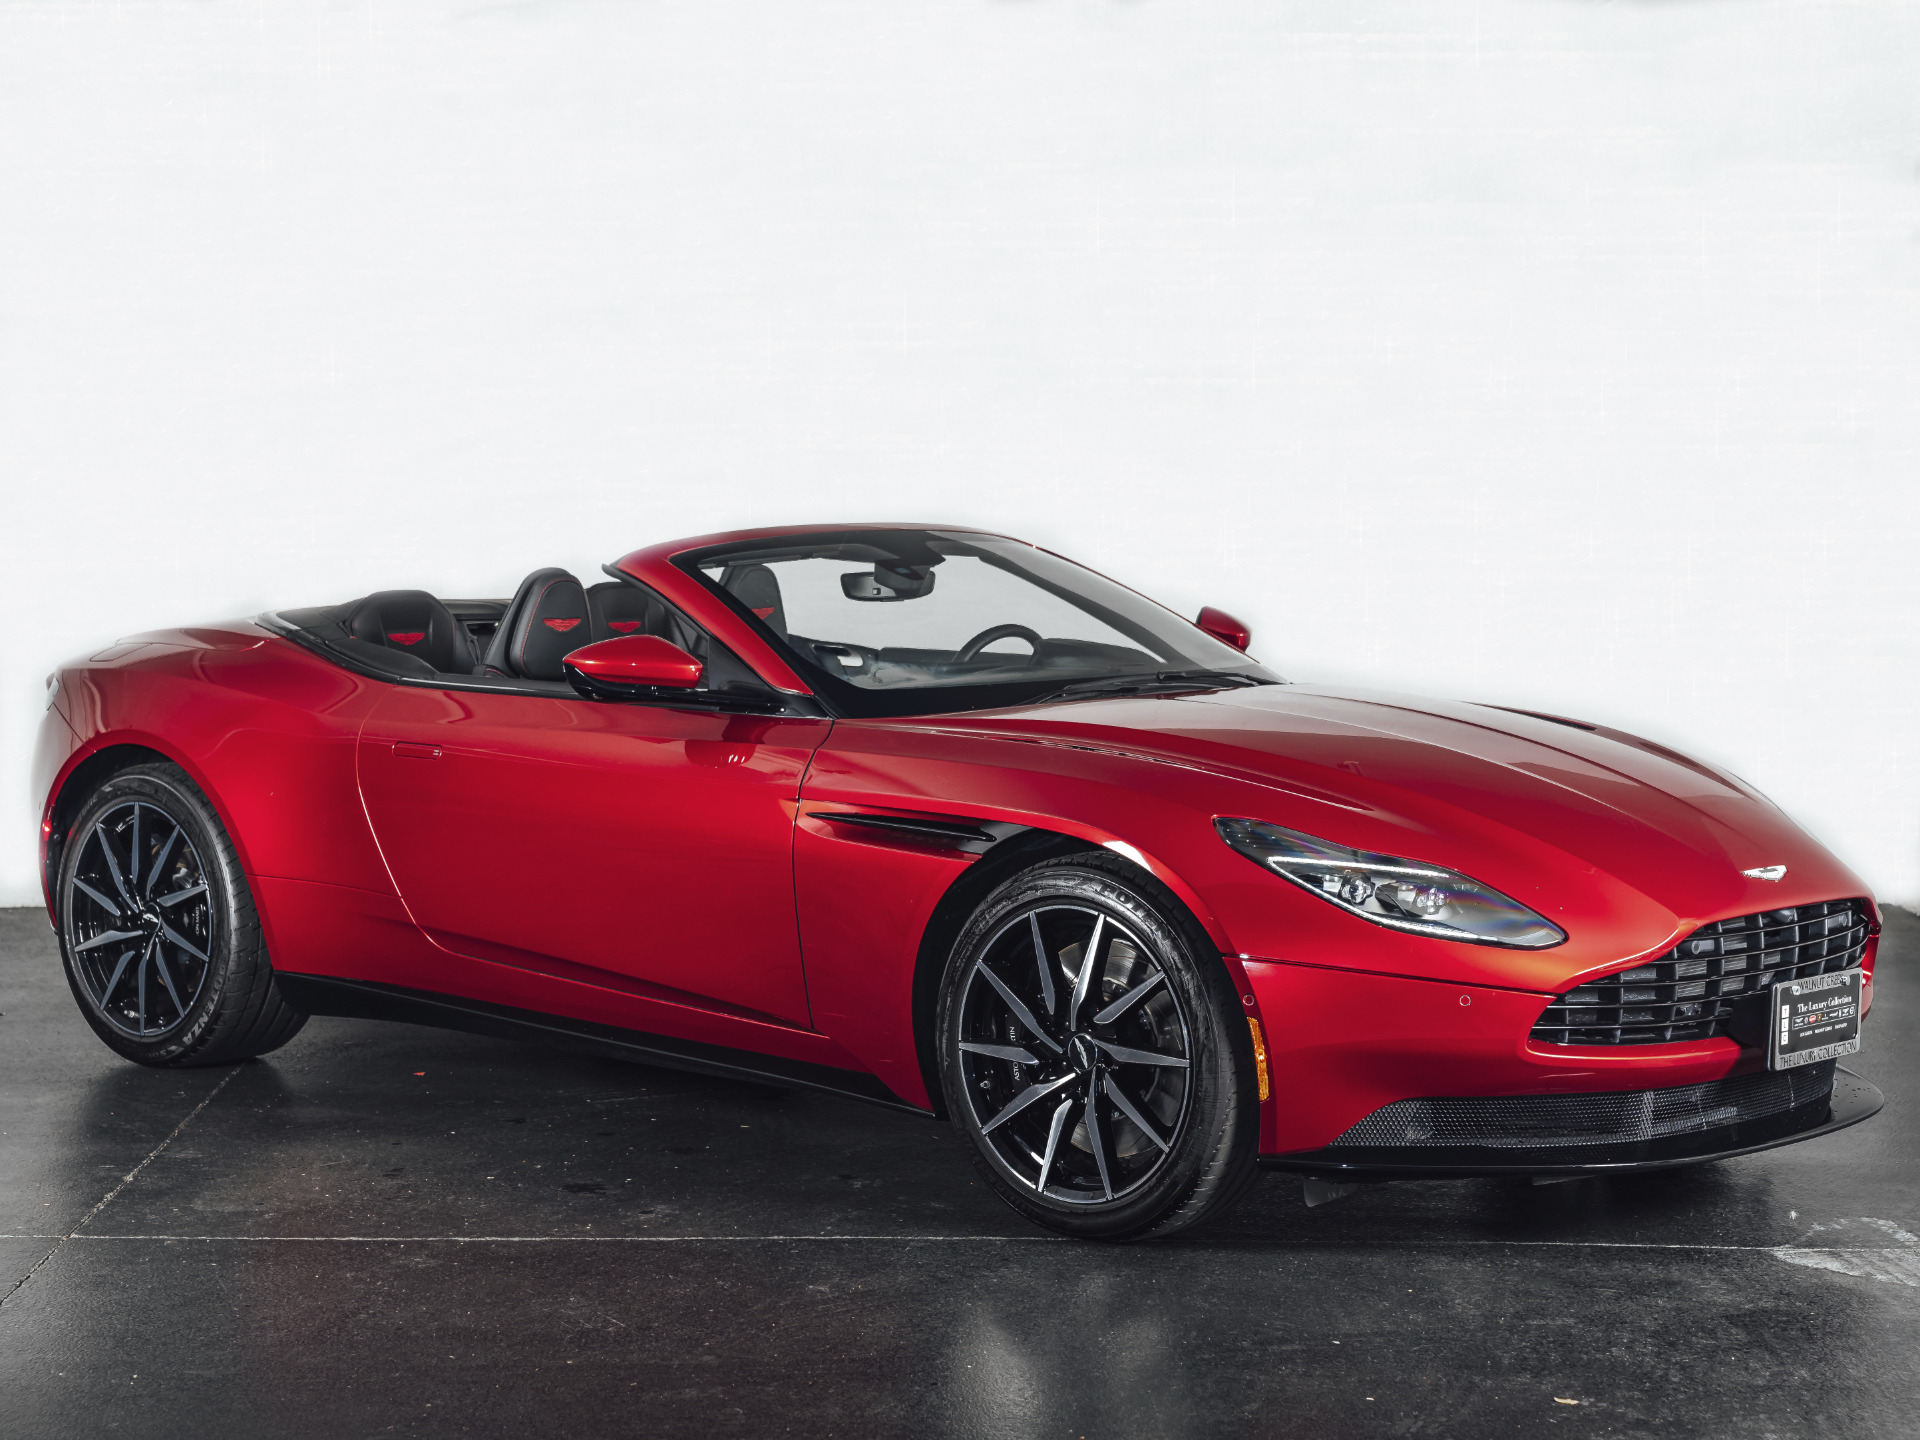 New 2020 Aston Martin Db11 Volante For Sale Sold The Luxury Collection Walnut Creek Stock Aml036